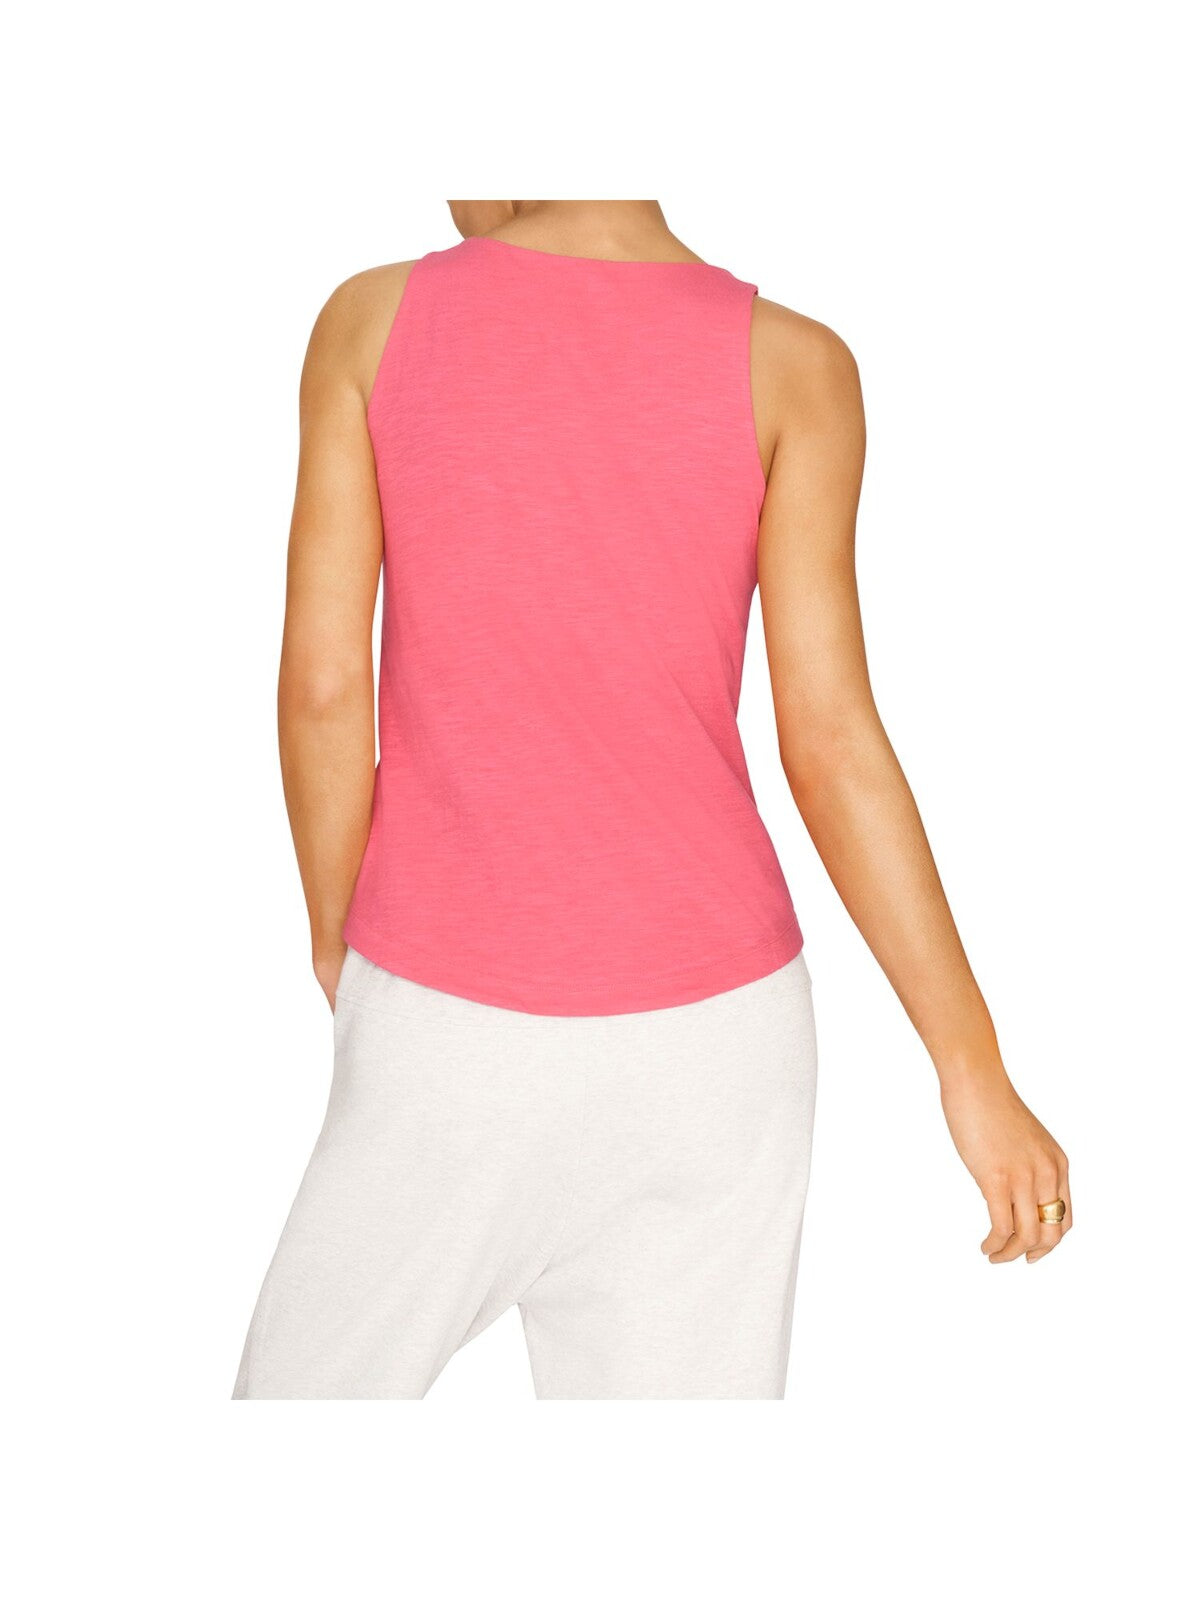 B NEW YORK Womens Pink Stretch Fitted Built-in Shelf Bra Sleeveless Square Neck Tank Top M